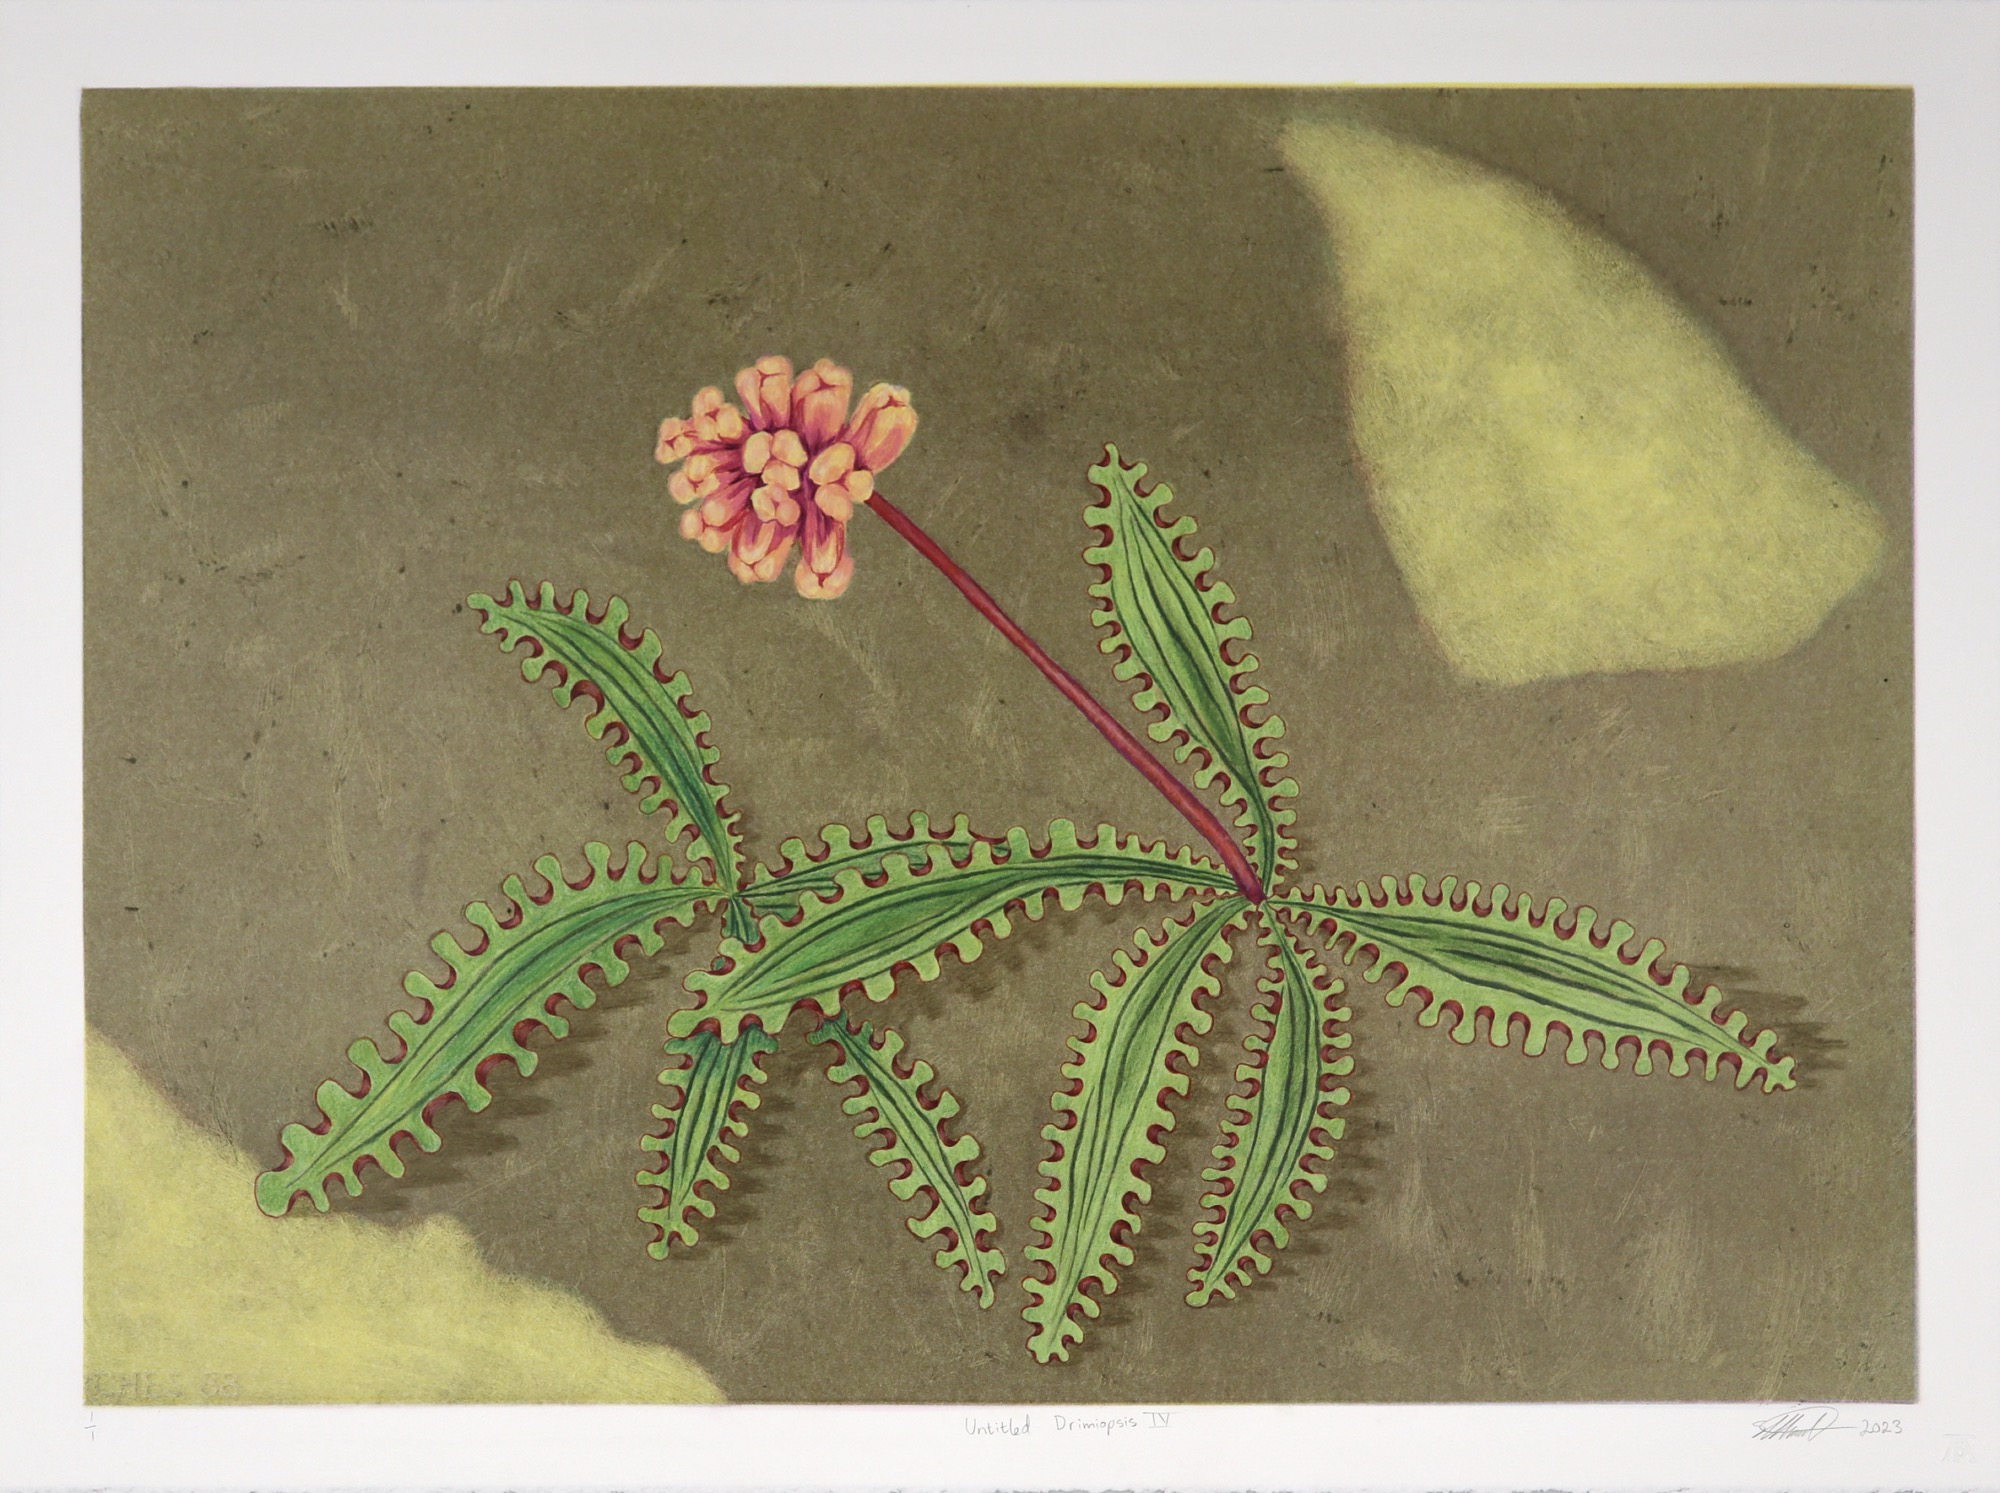 Monotype by Simon Attwood showing small drimiopsis plant in flower